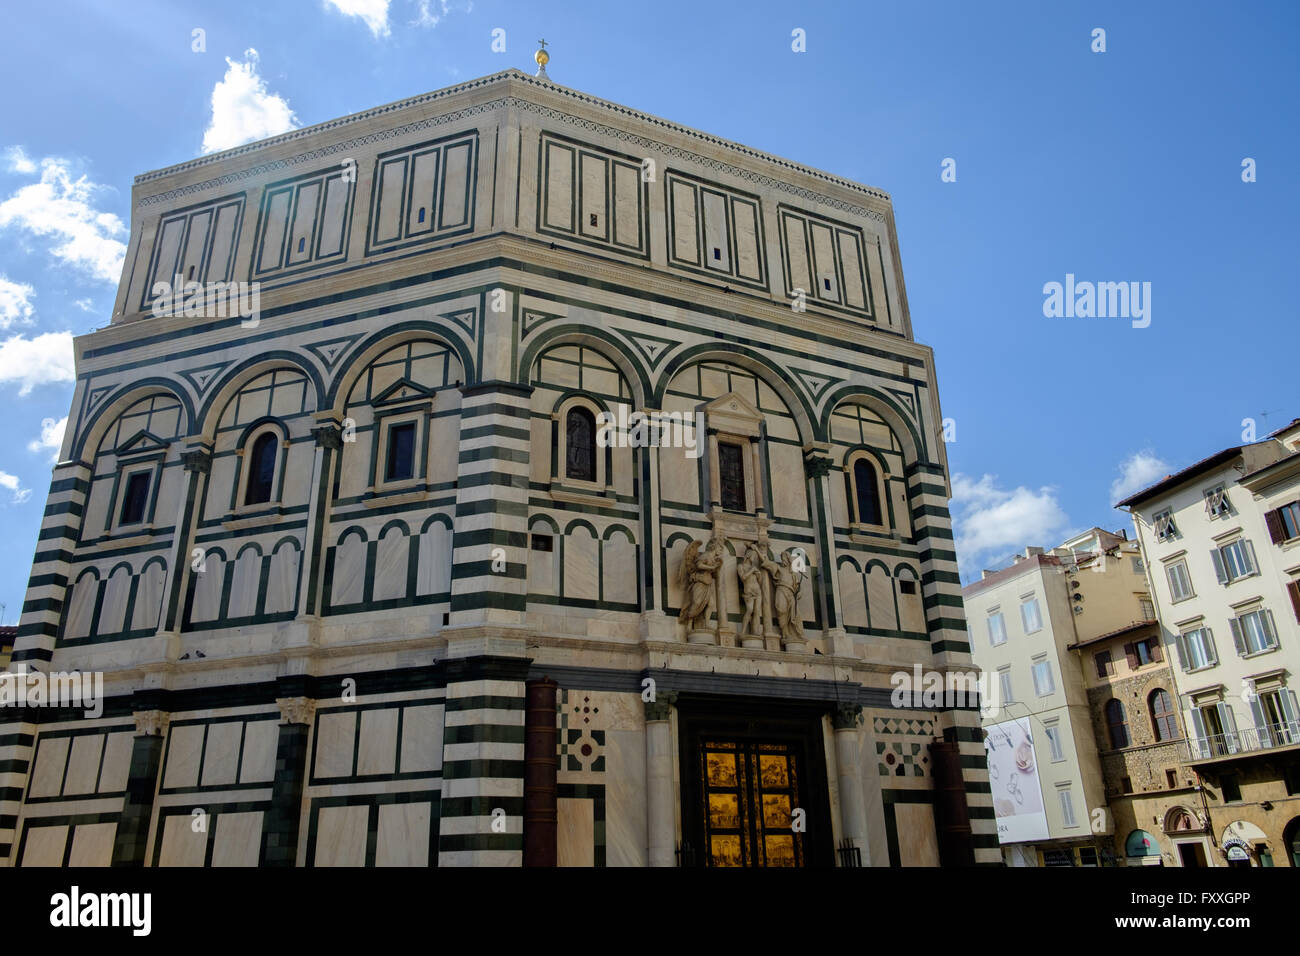 The Florence Baptistery or Battistero di San Giovanni in Florence Stock Photo